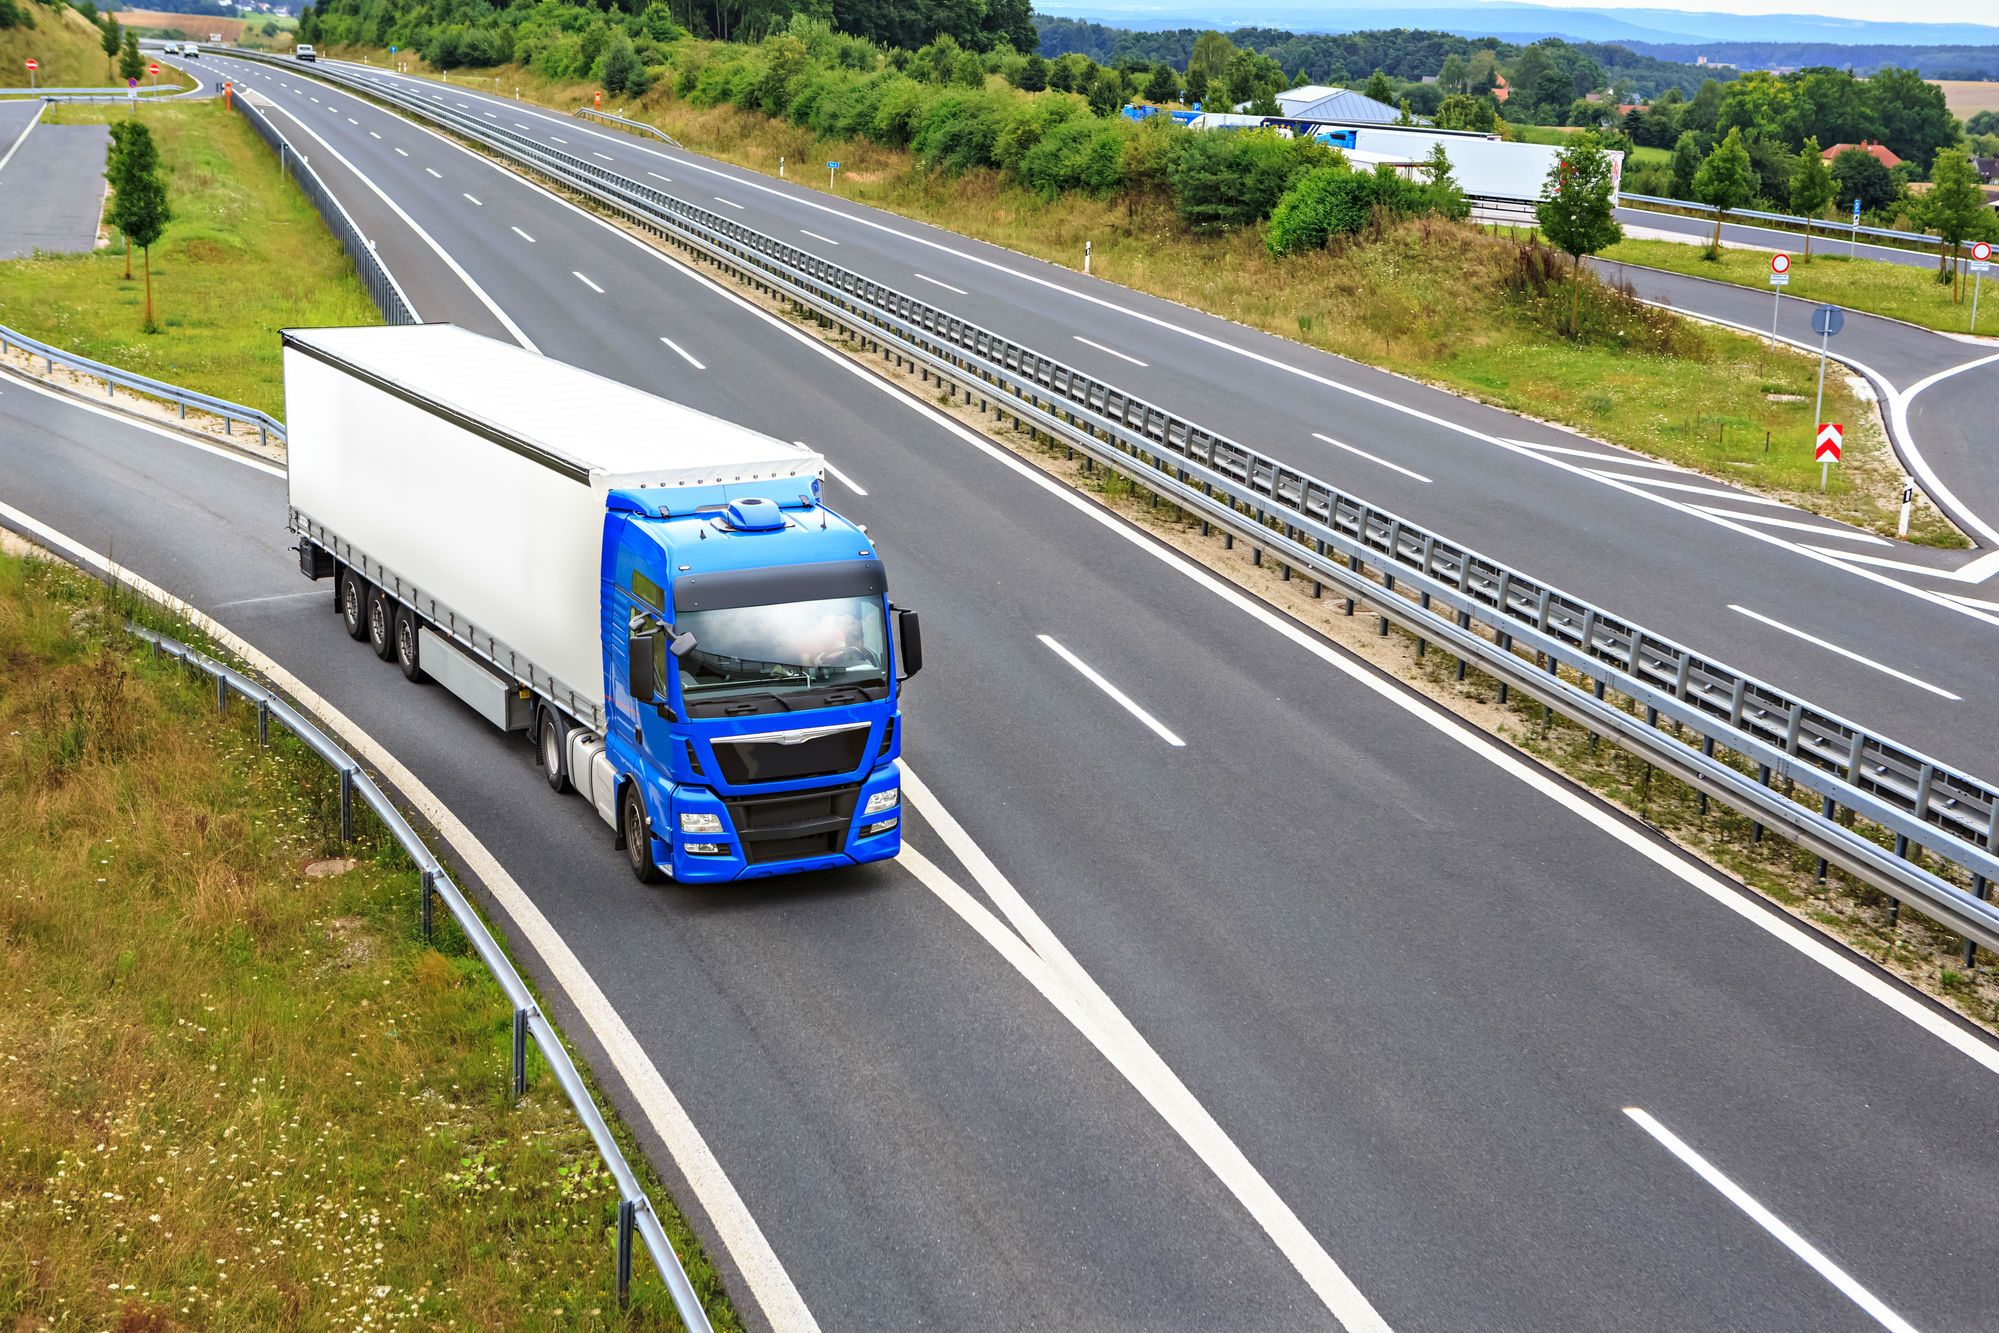 Motorists are cautioned to be aware of truckers' large blind spots.